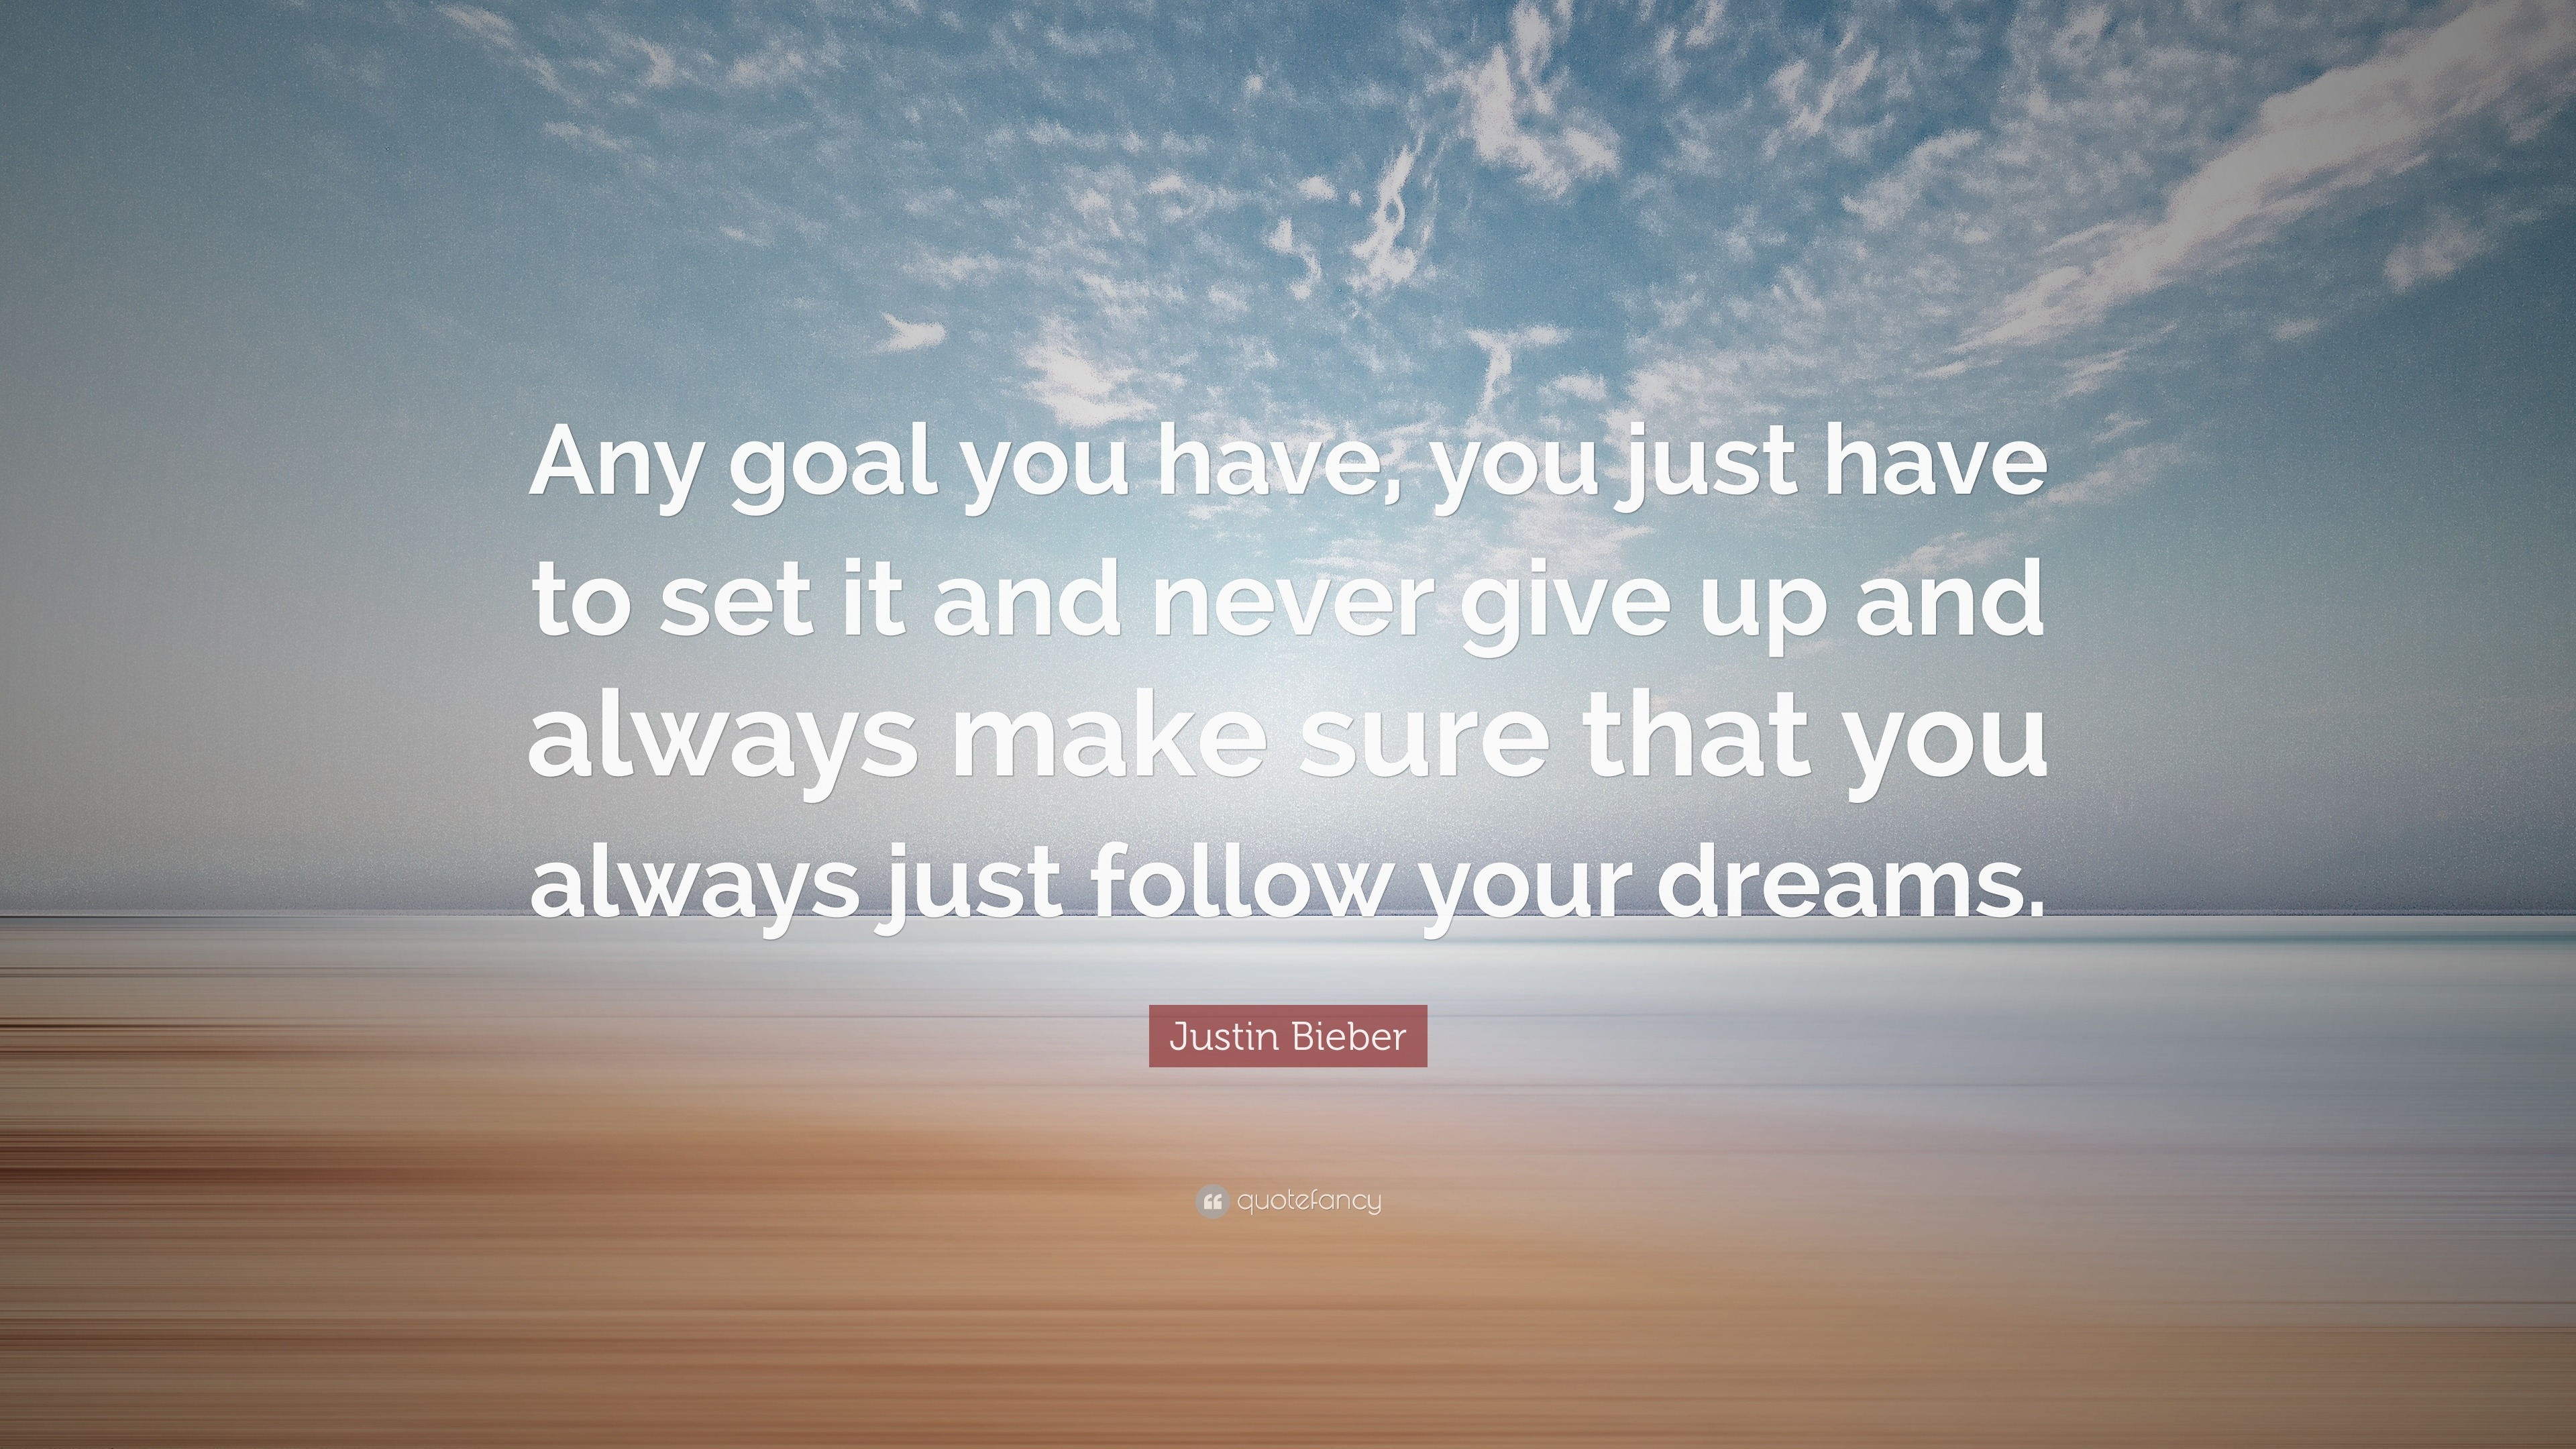 Justin Bieber Quote: “Any goal you have, you just have to set it and ...